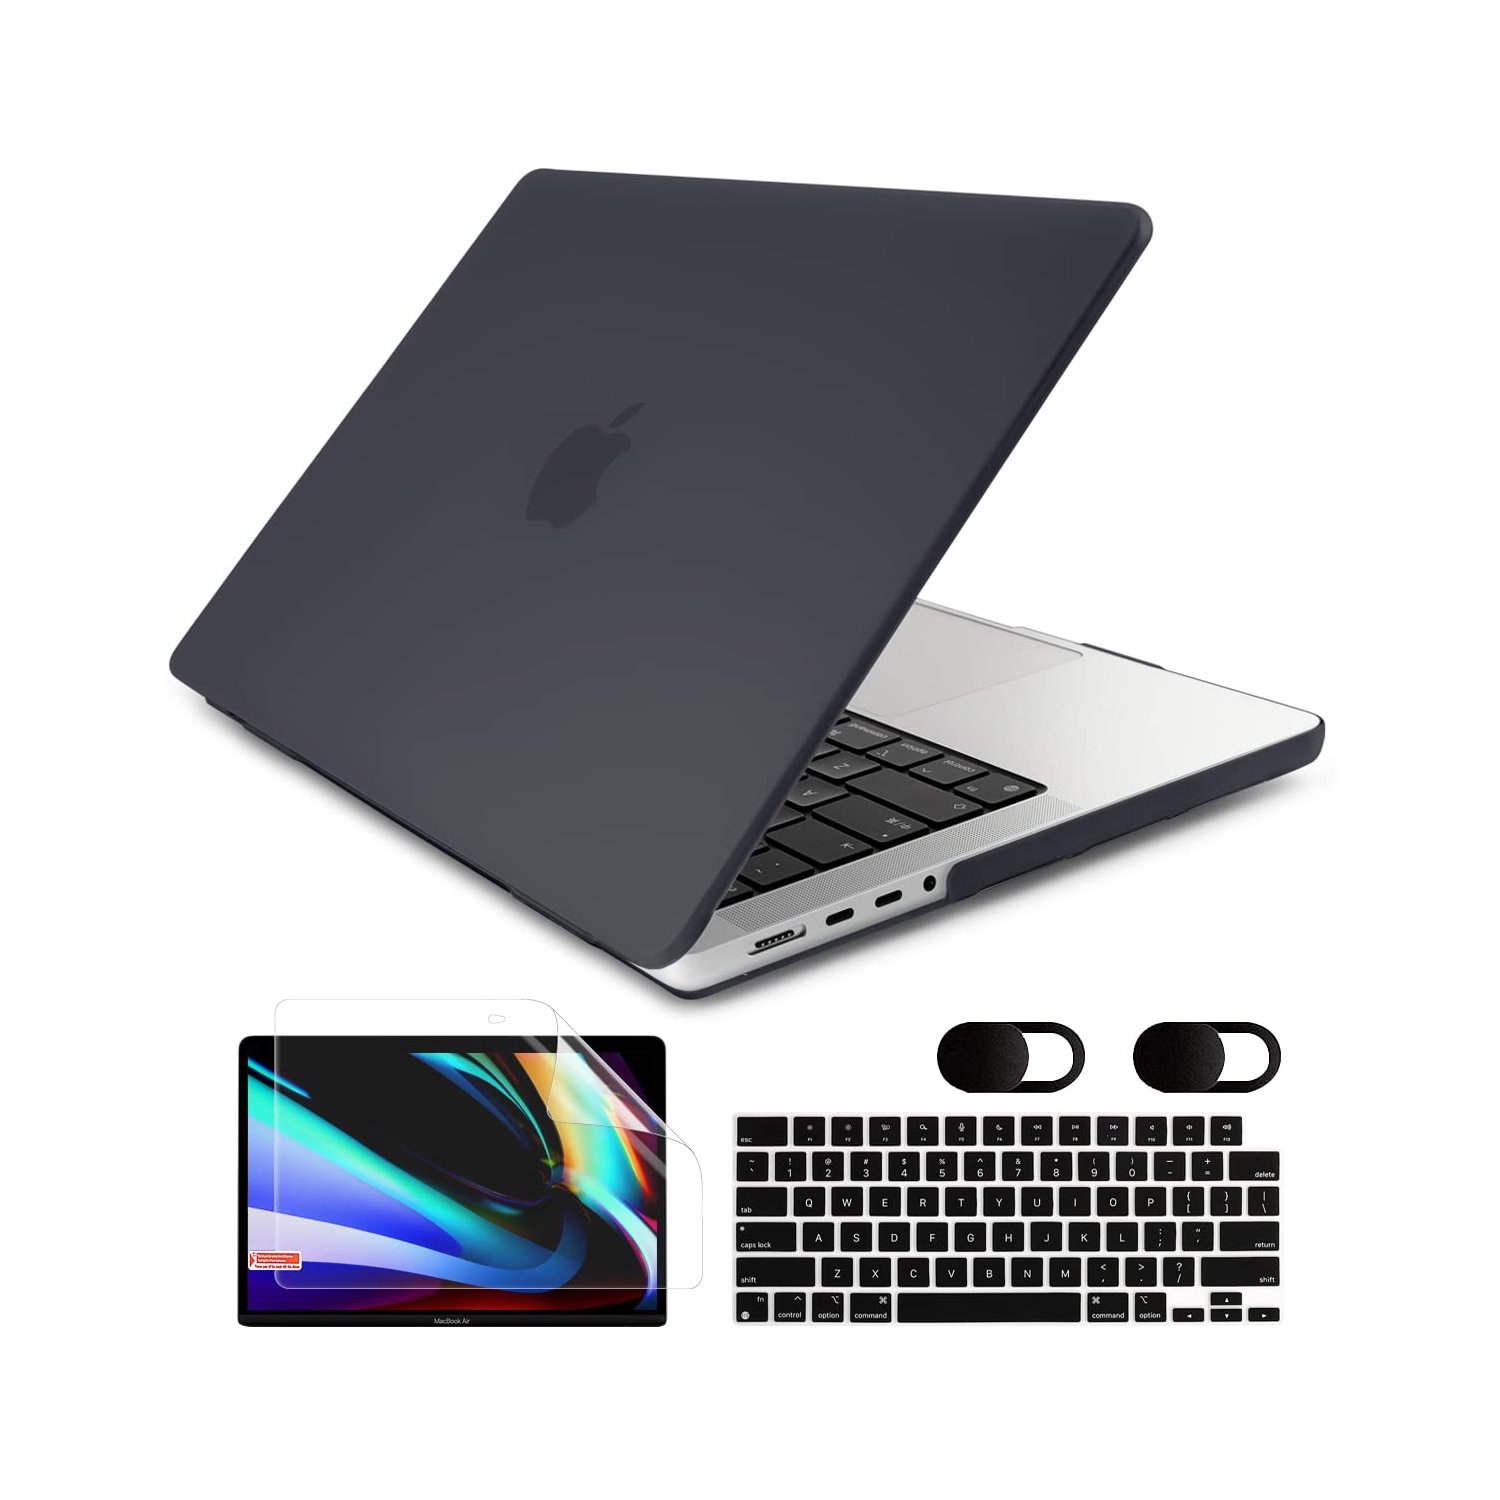 MacBook Pro 16 inch Case 2022 2021 Release Model: A2485 M1 Pro/Max, Plastic Hard Shell Case with Keyboard Cover & Screen Protector for MacBook Pro 16 with Touch ID, Black